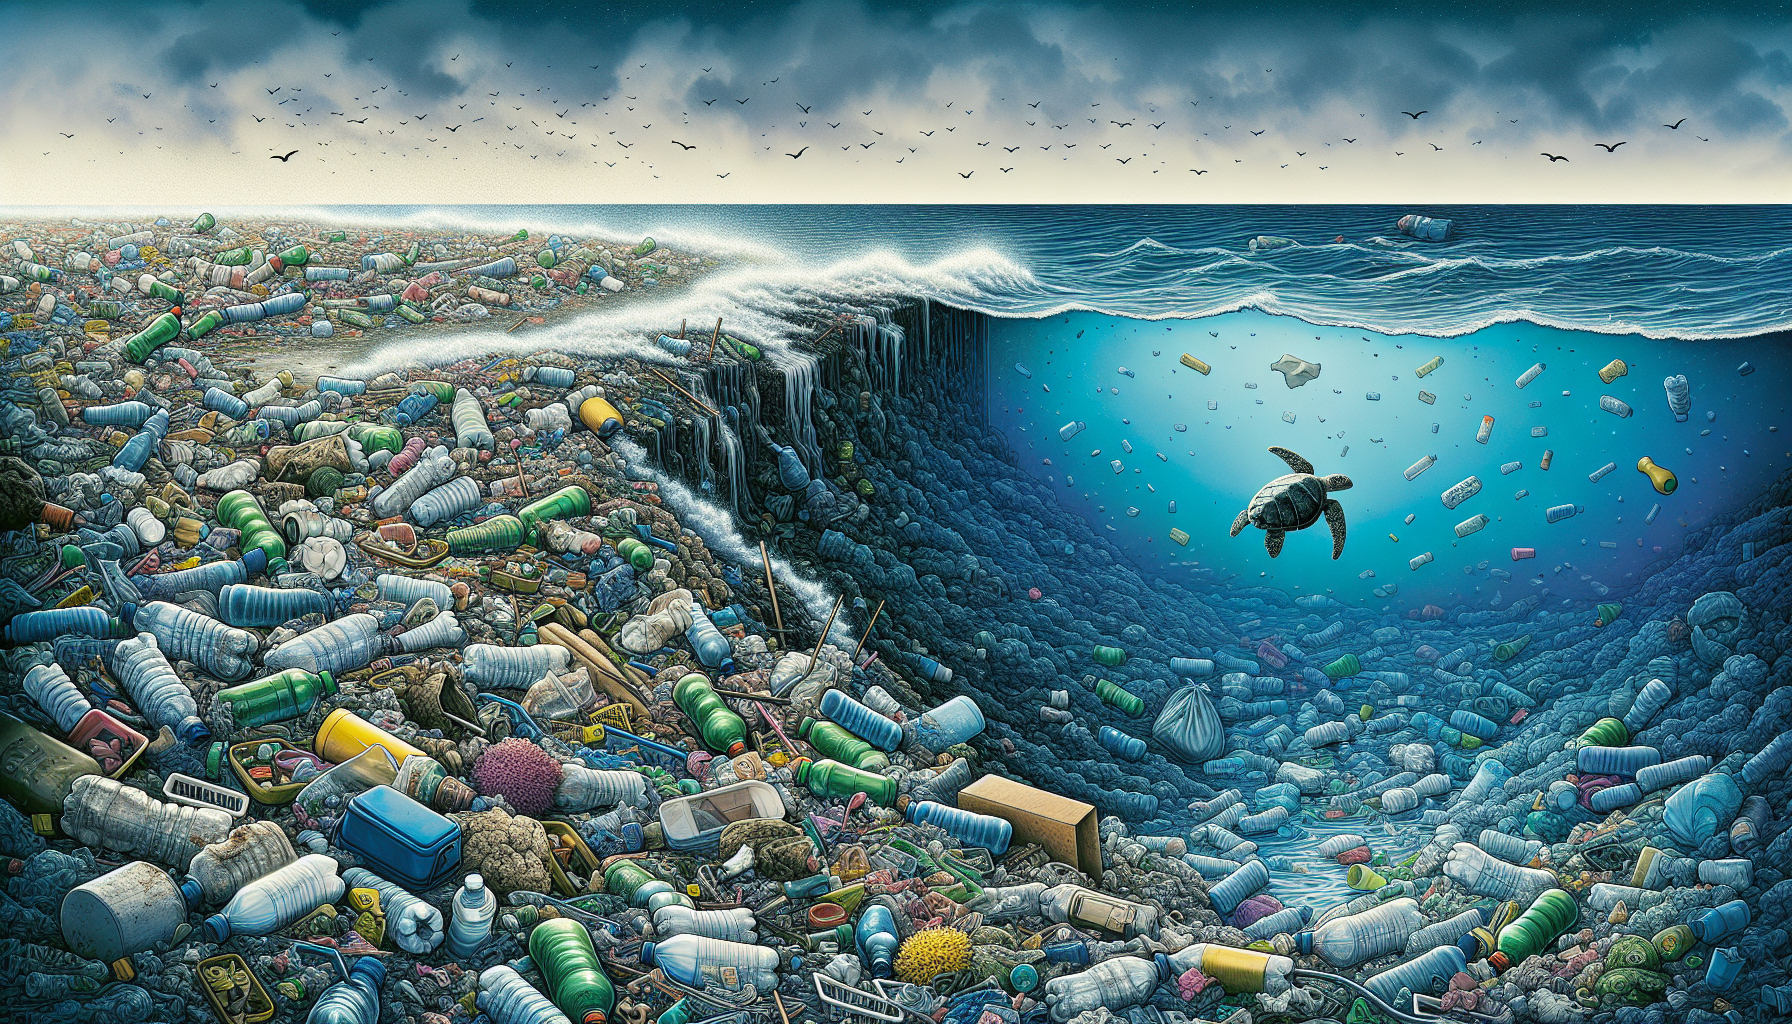 Plastic pollution affecting planetary health